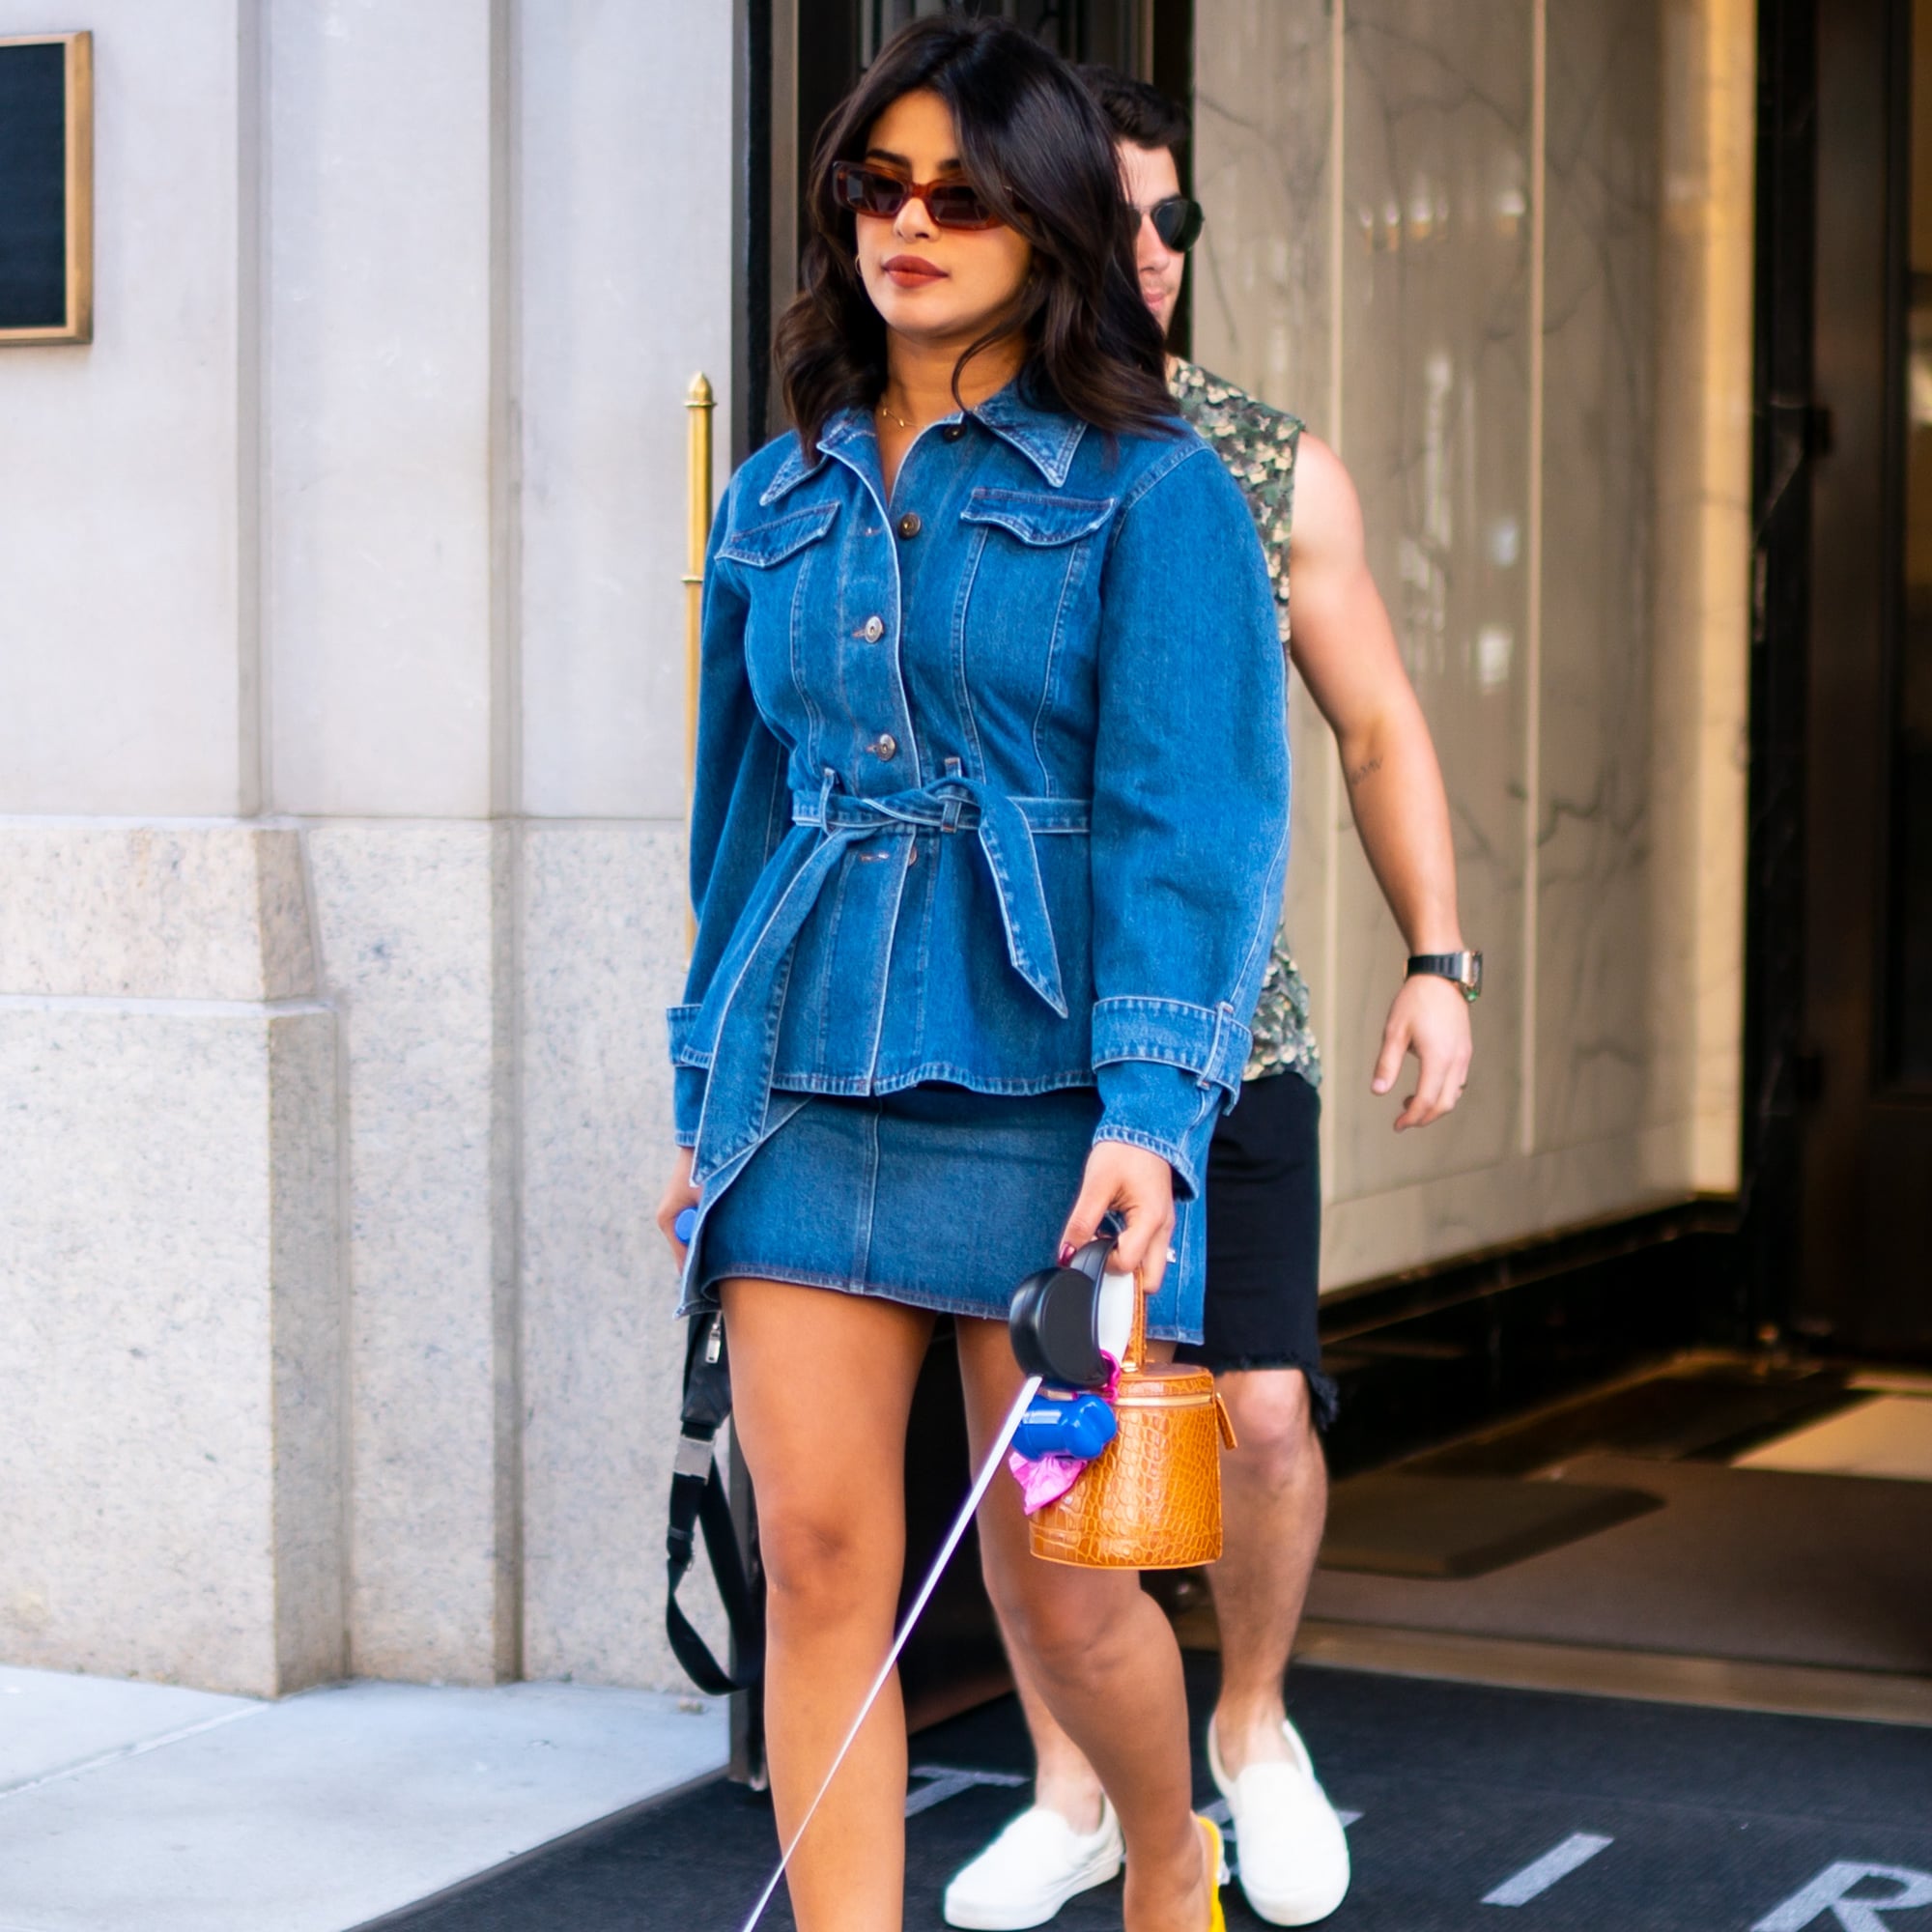 We can all learn a thing or two from Priyanka Chopra's street style |  Fashion News - The Indian Express